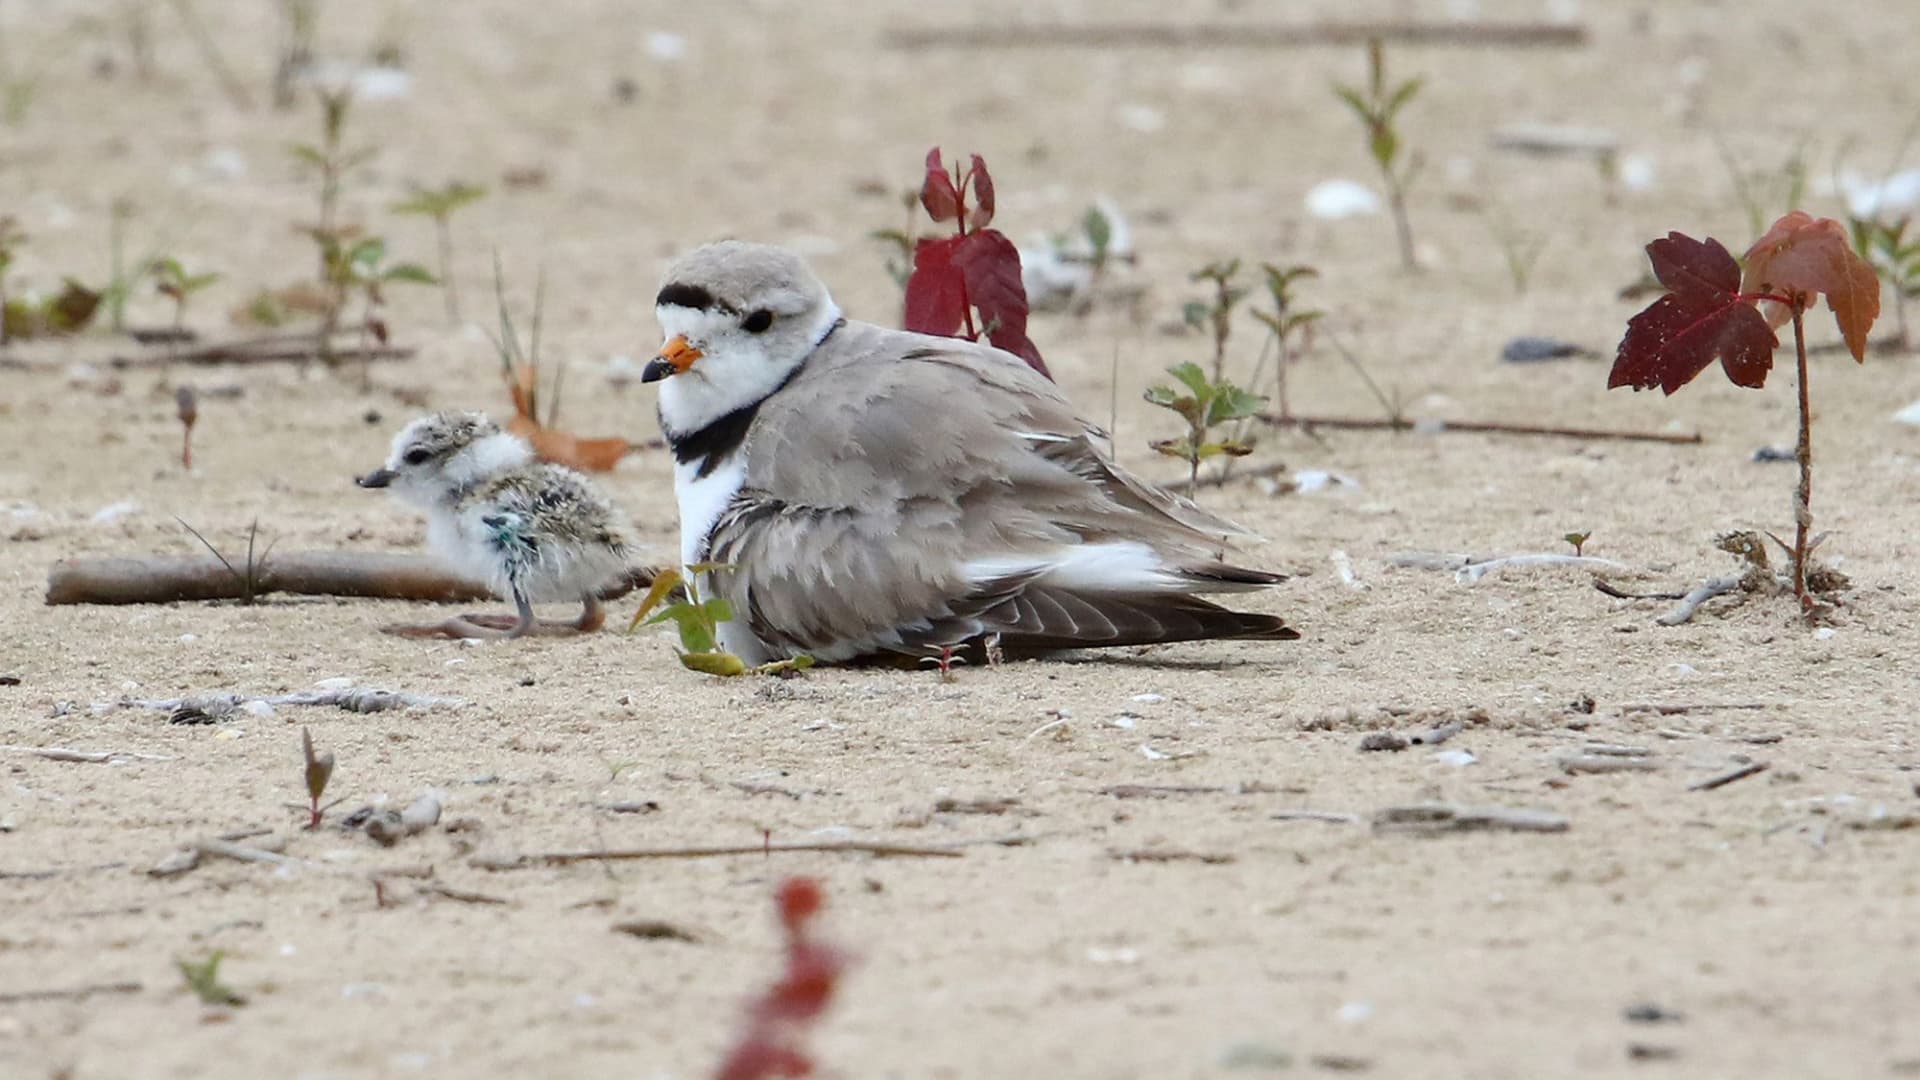 A newly hatched piping plover chick stands next to one of its parents, Monty or Rose, at Montrose Beach on July 10, 2021.